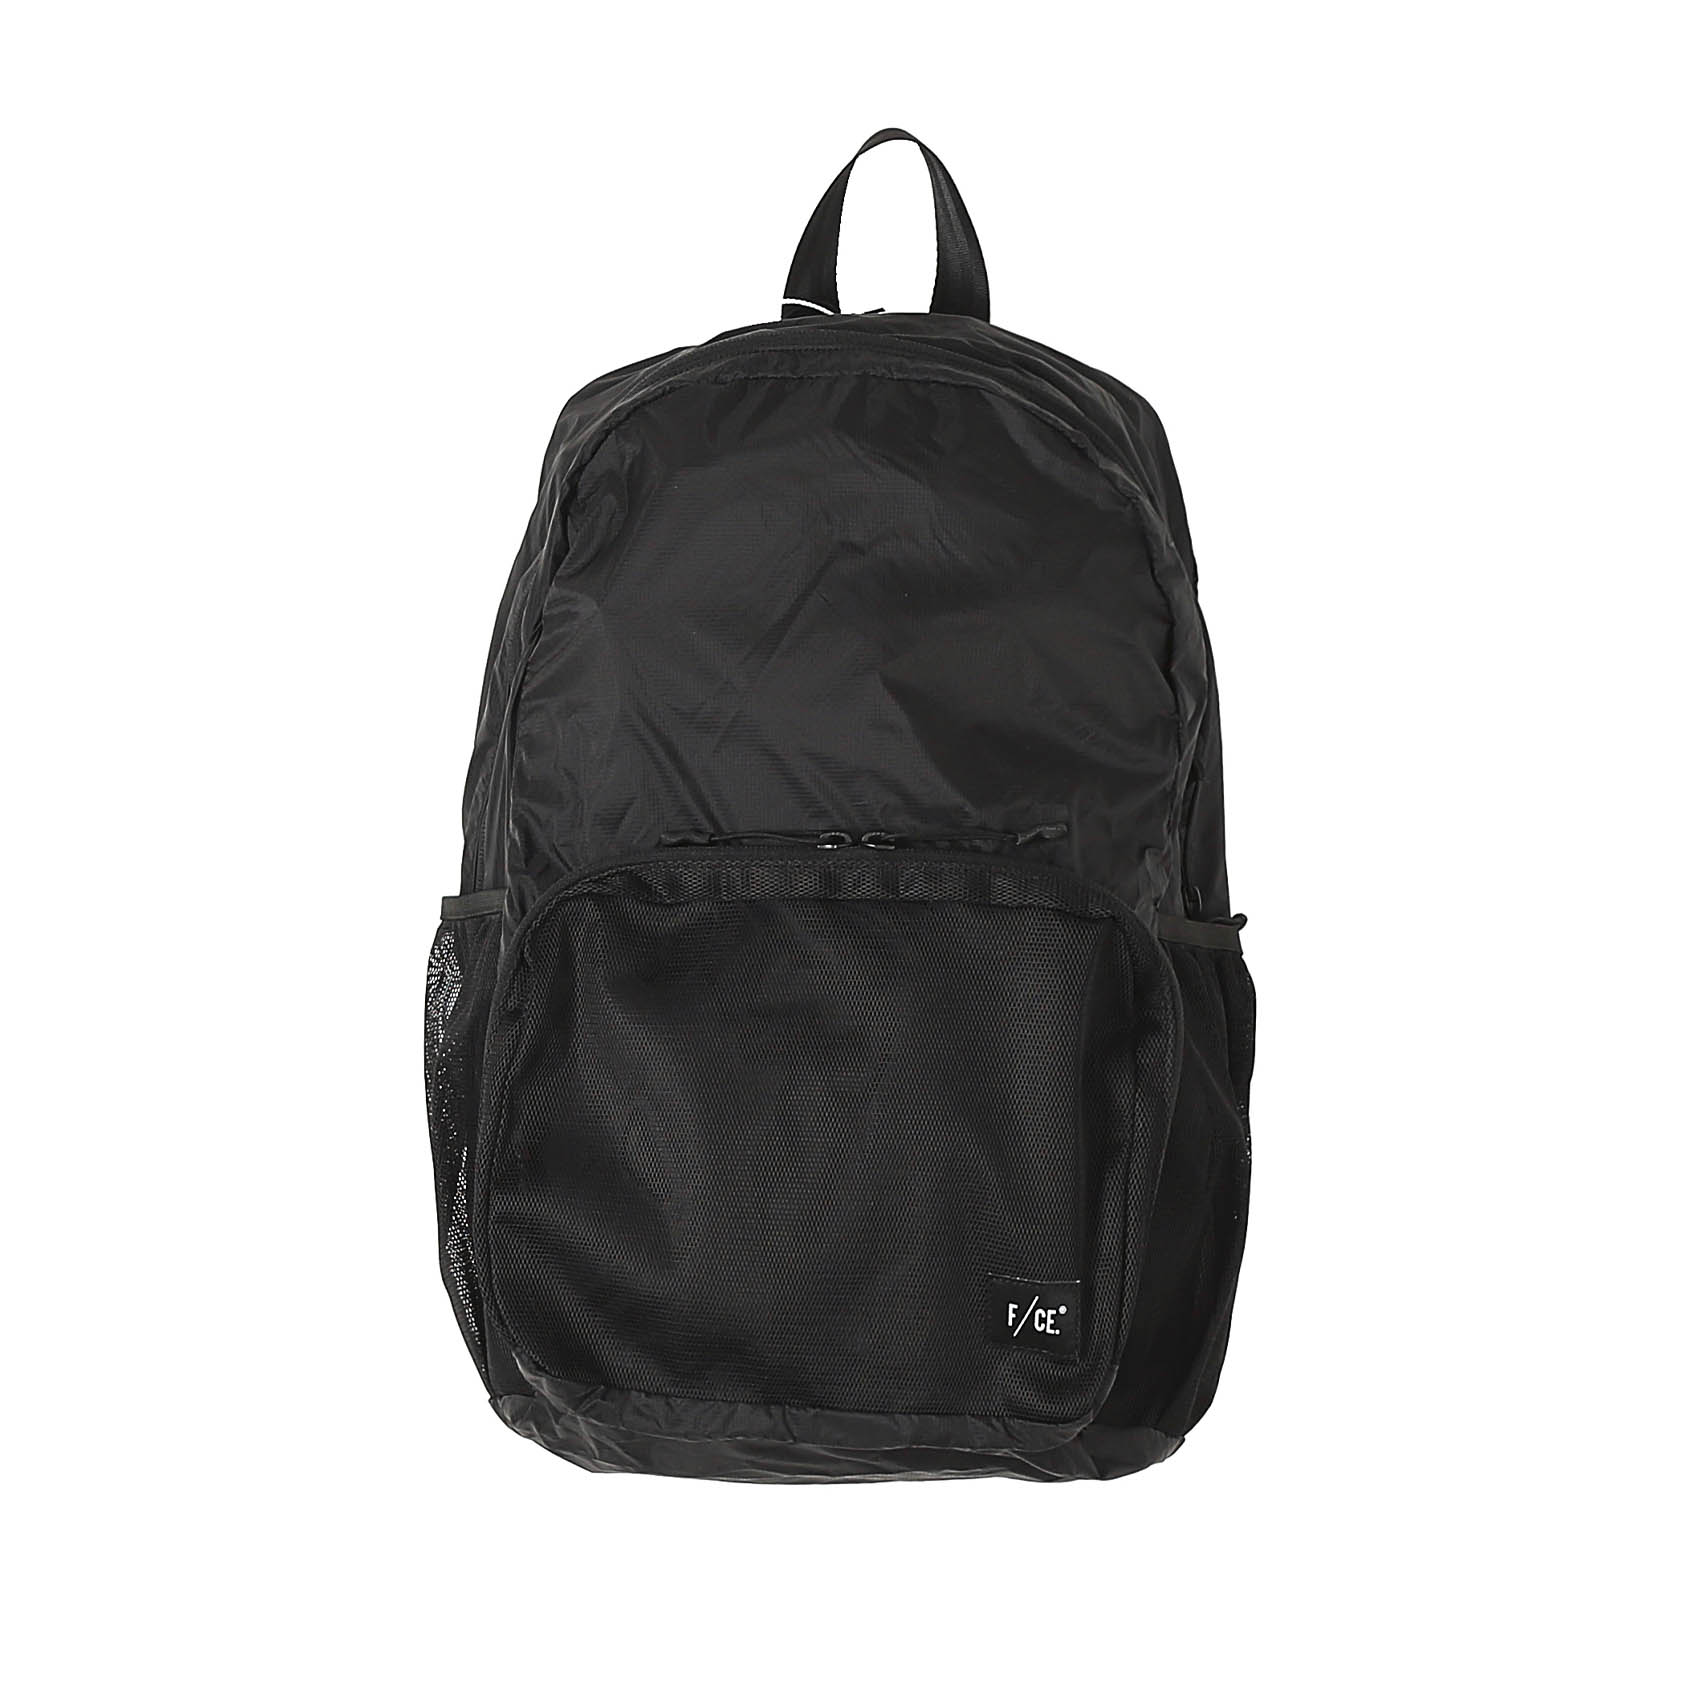 RECYCLED PACKABLE DAYPACK - BLACK